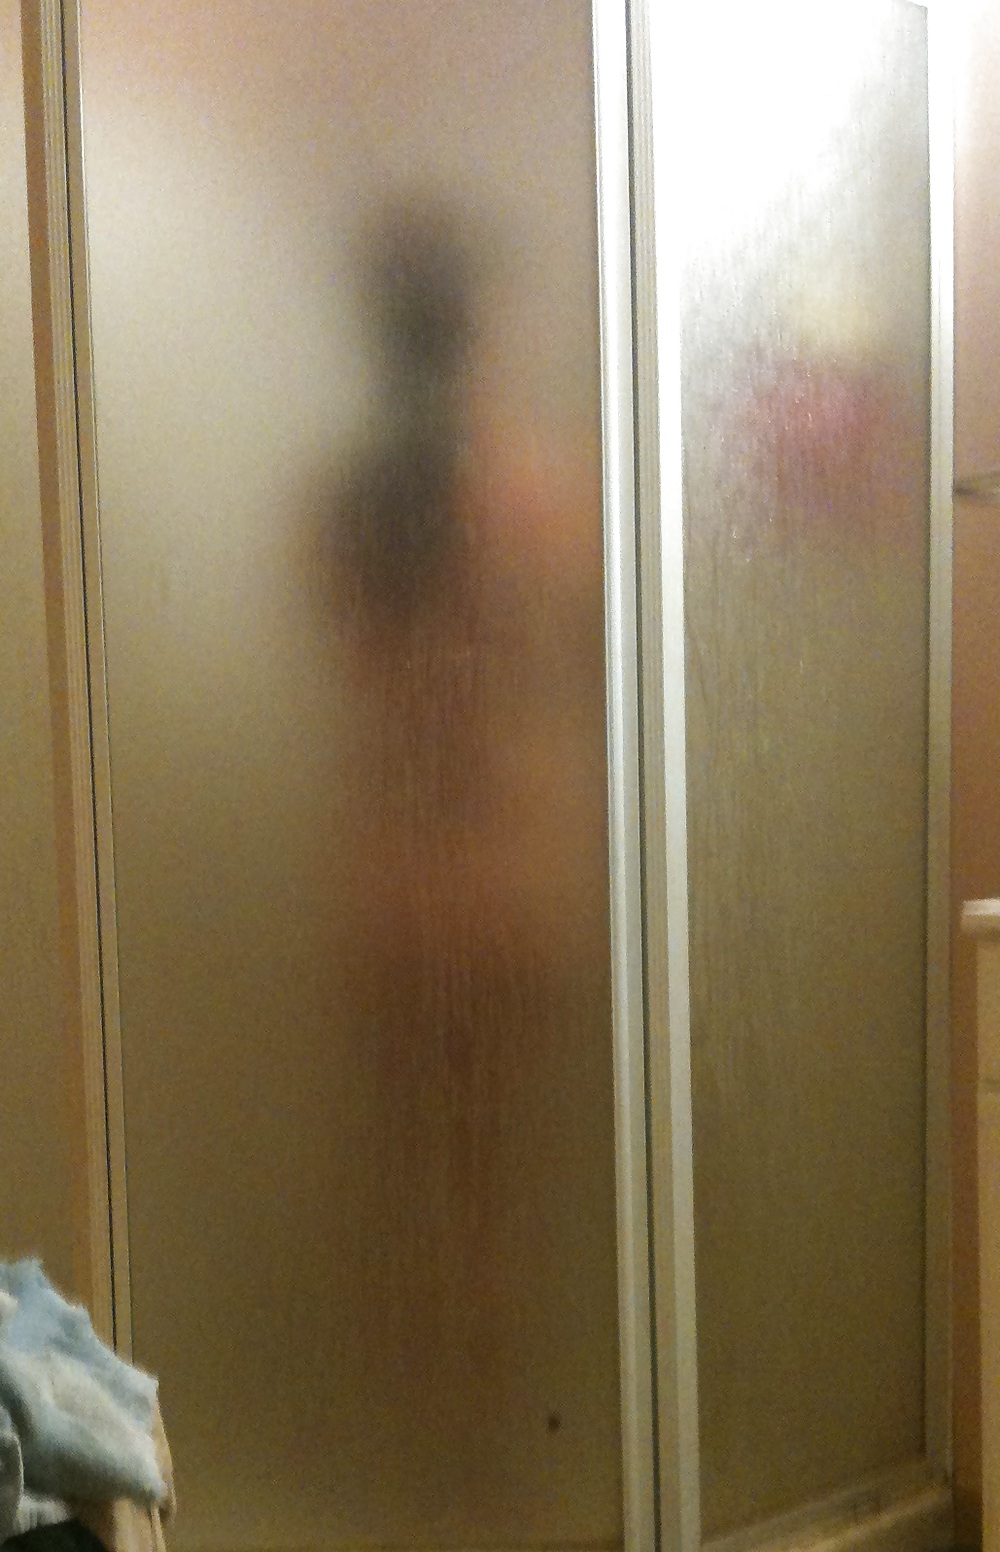 Wife in shower. Please comment #6106046